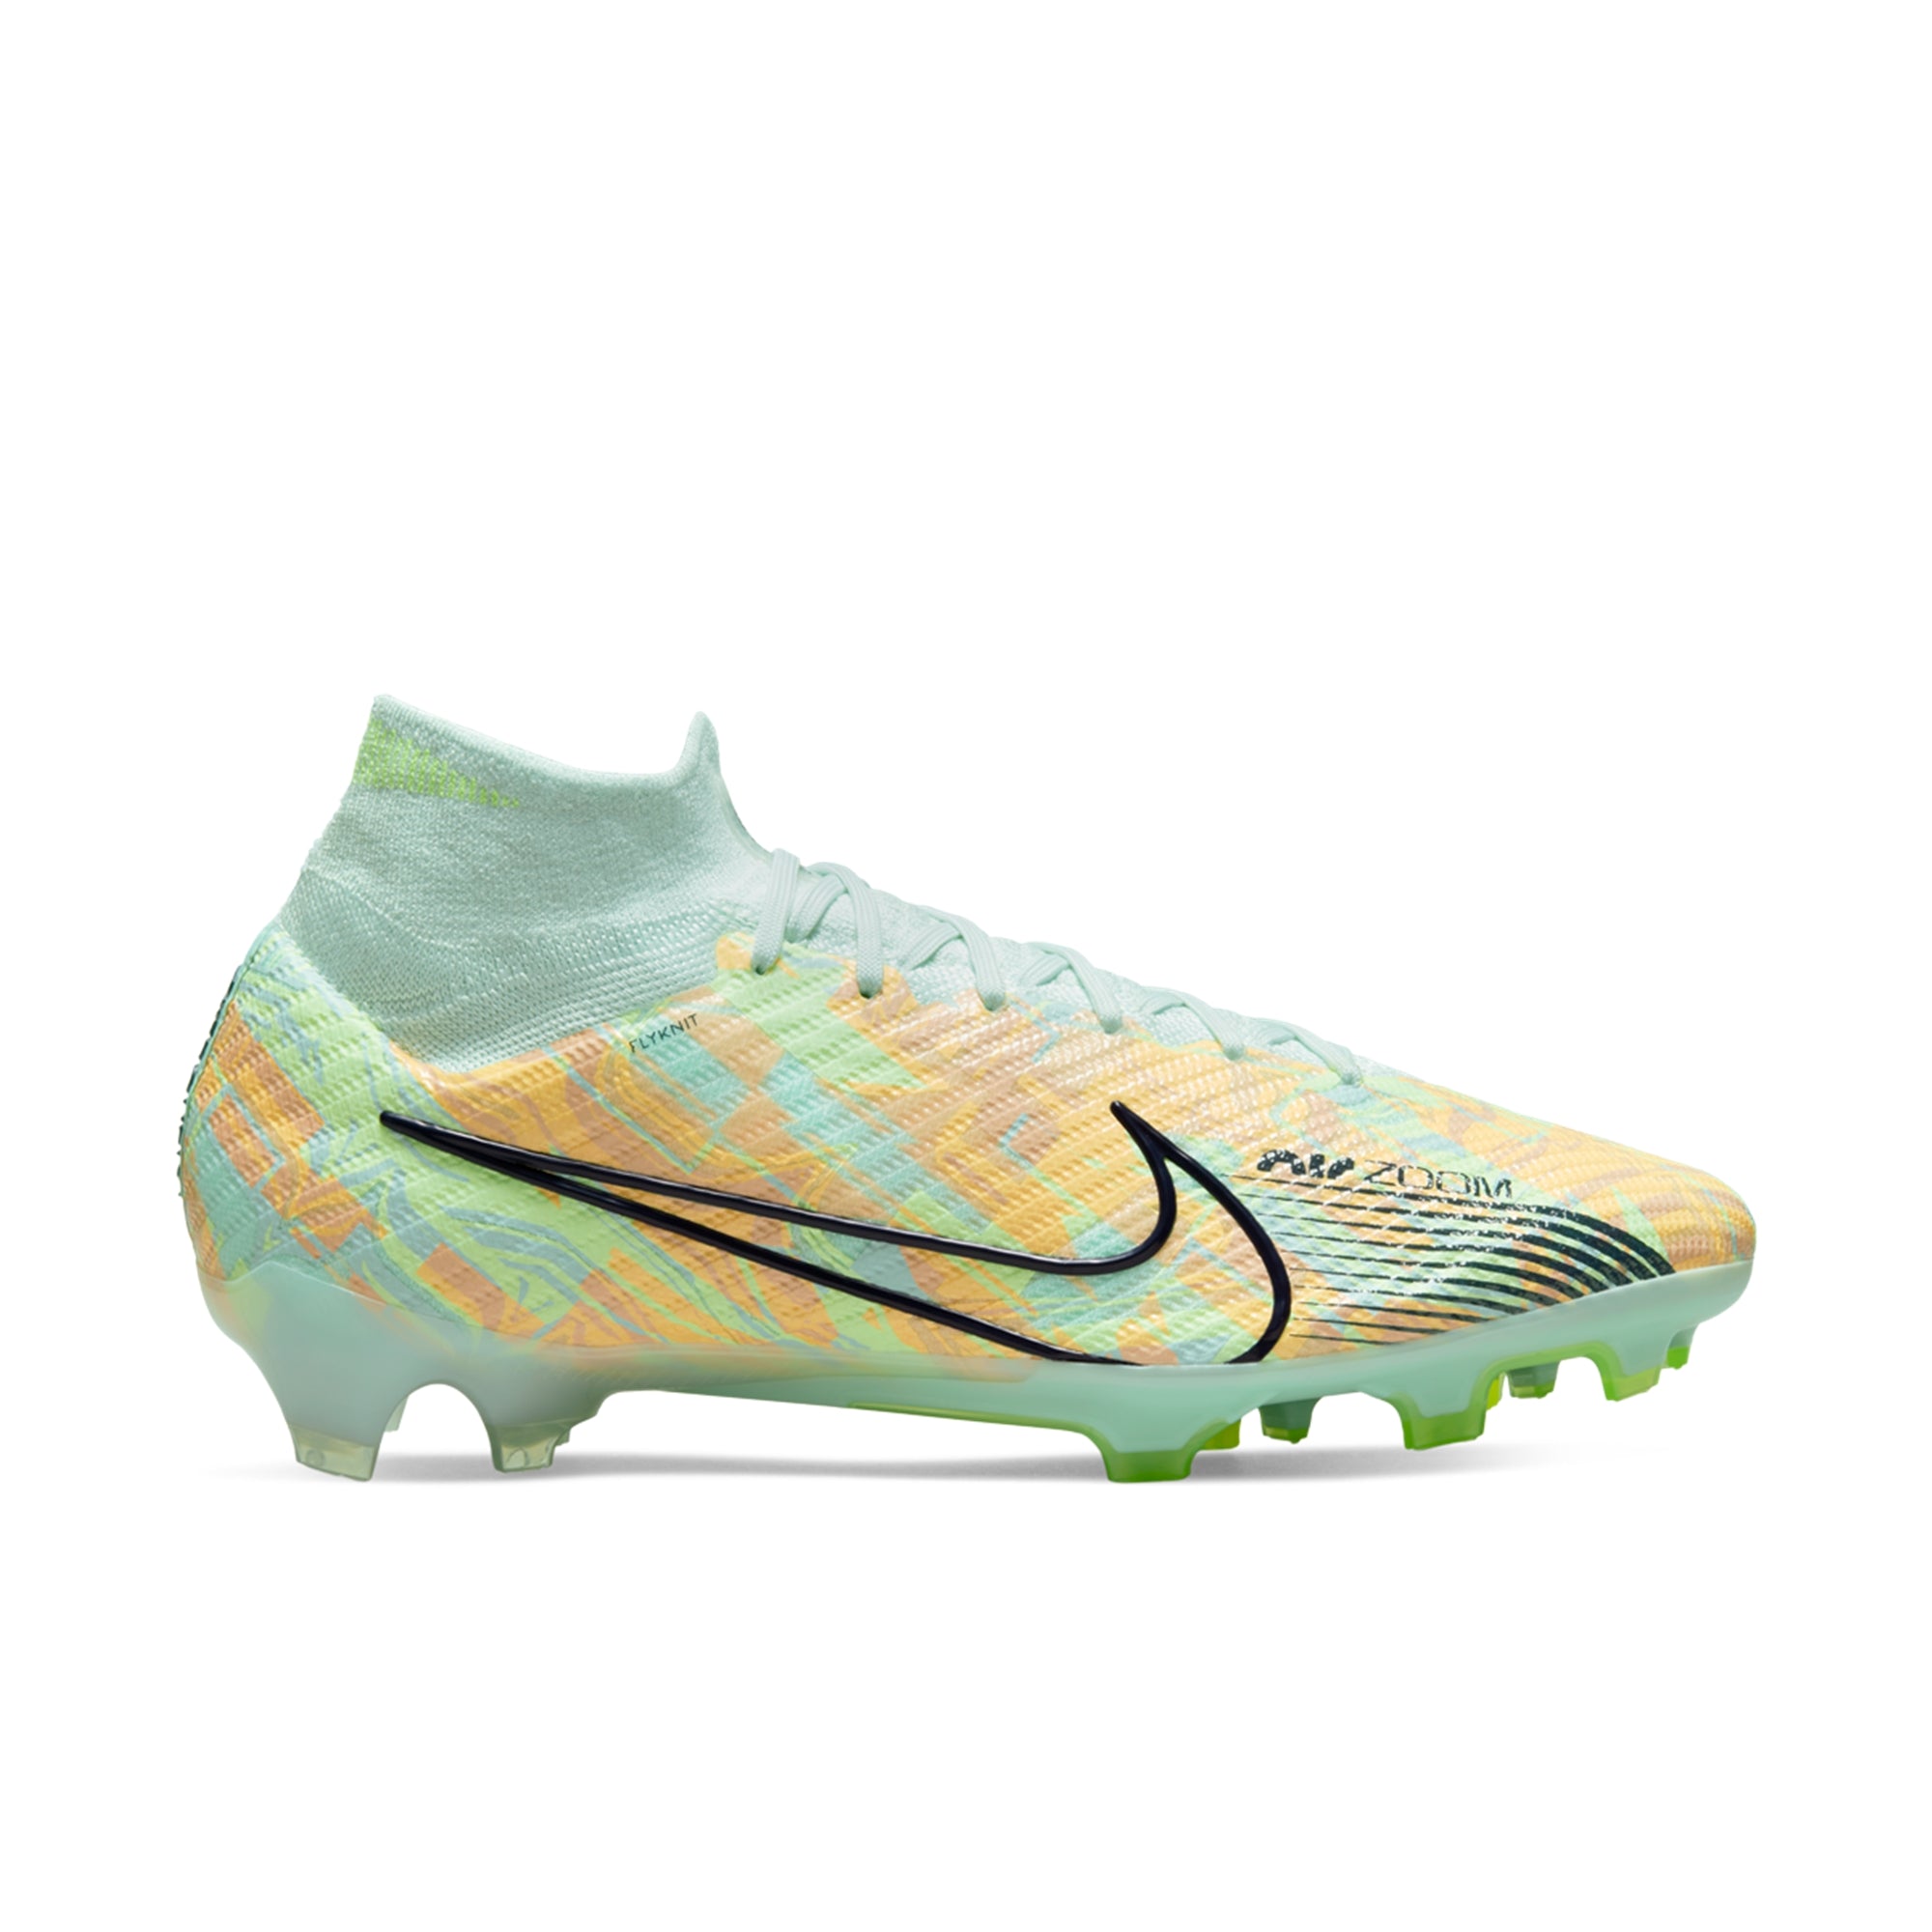 Emotie Dhr Promoten Nike Air Zoom Mercurial Superfly 9 Elite FG Firm Ground Soccer Cleat -  Barely Green/Blackened Blue/Total Orange/Ghost Green DJ4977-343 – Soccer  Zone USA